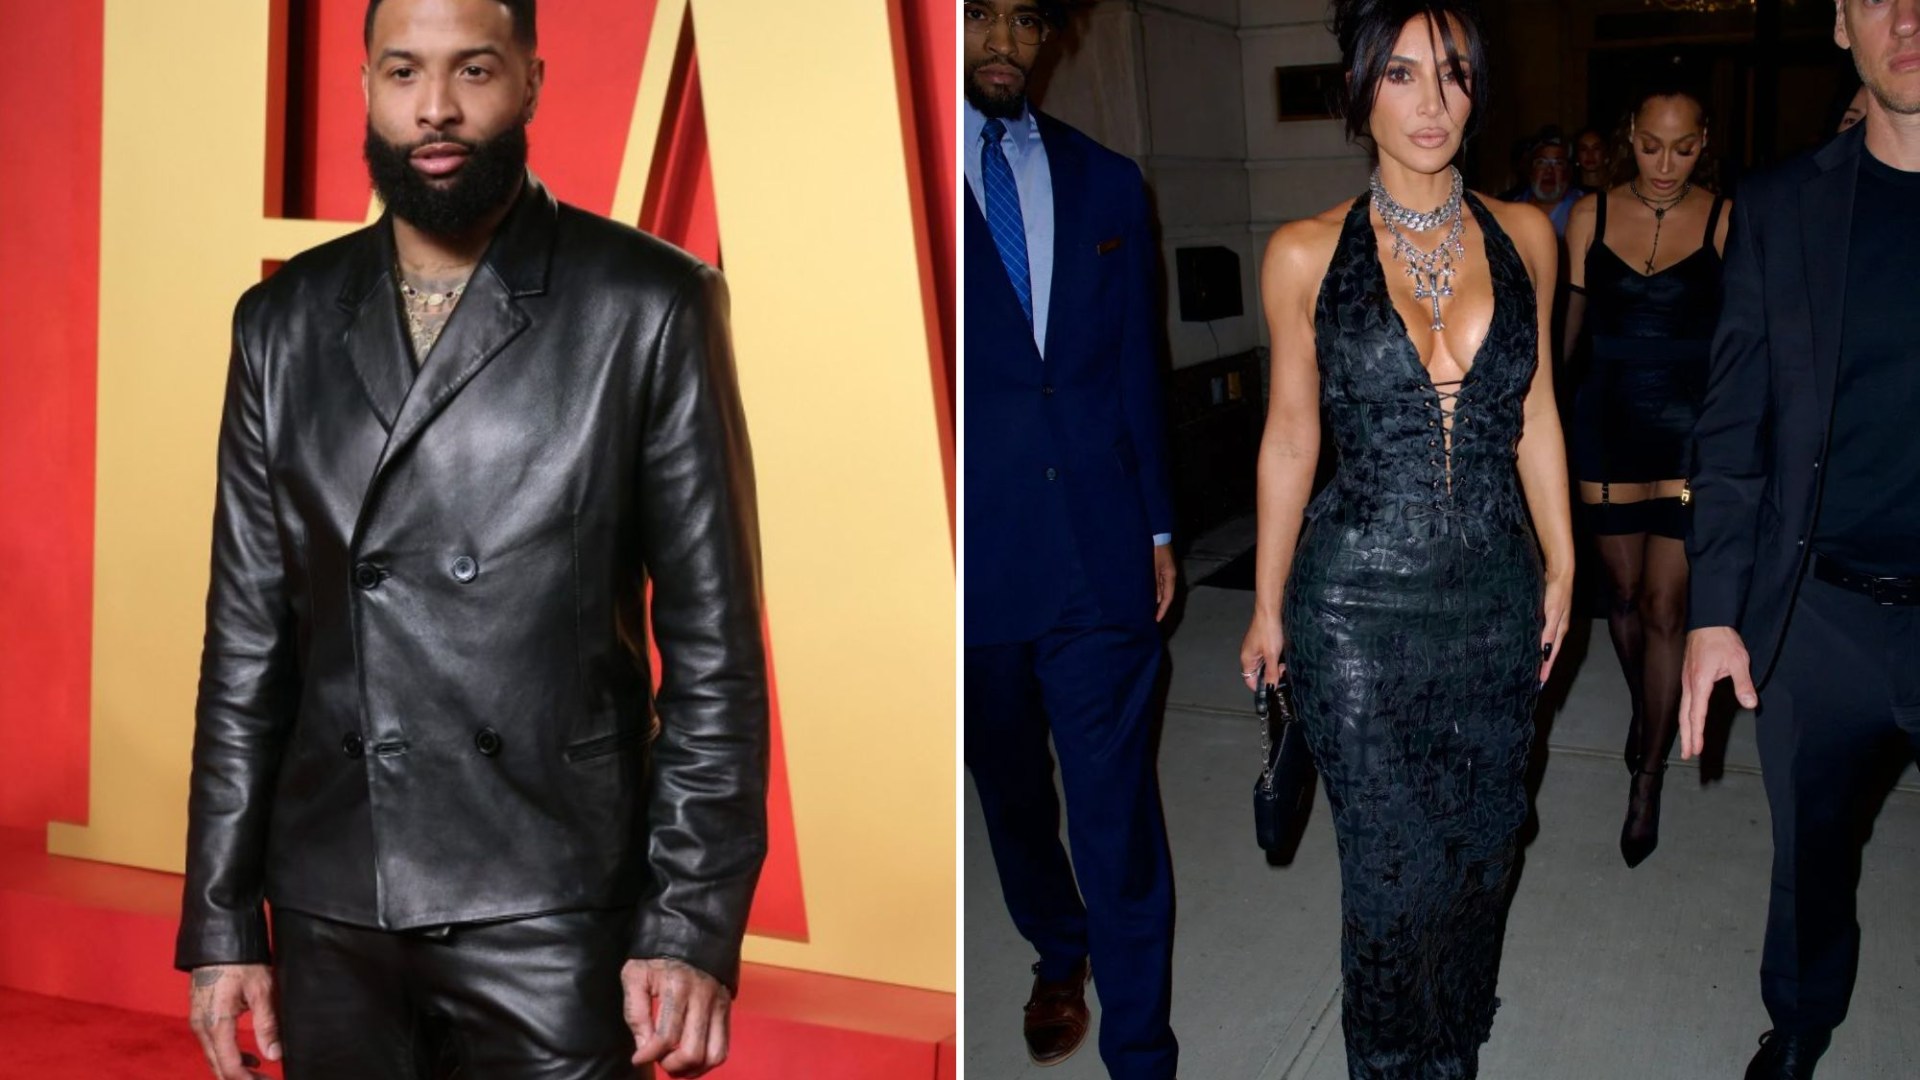 Kim Kardashian’s Ex Odell Beckham Jr.: Uncovering the Truth Behind Their Breakup!